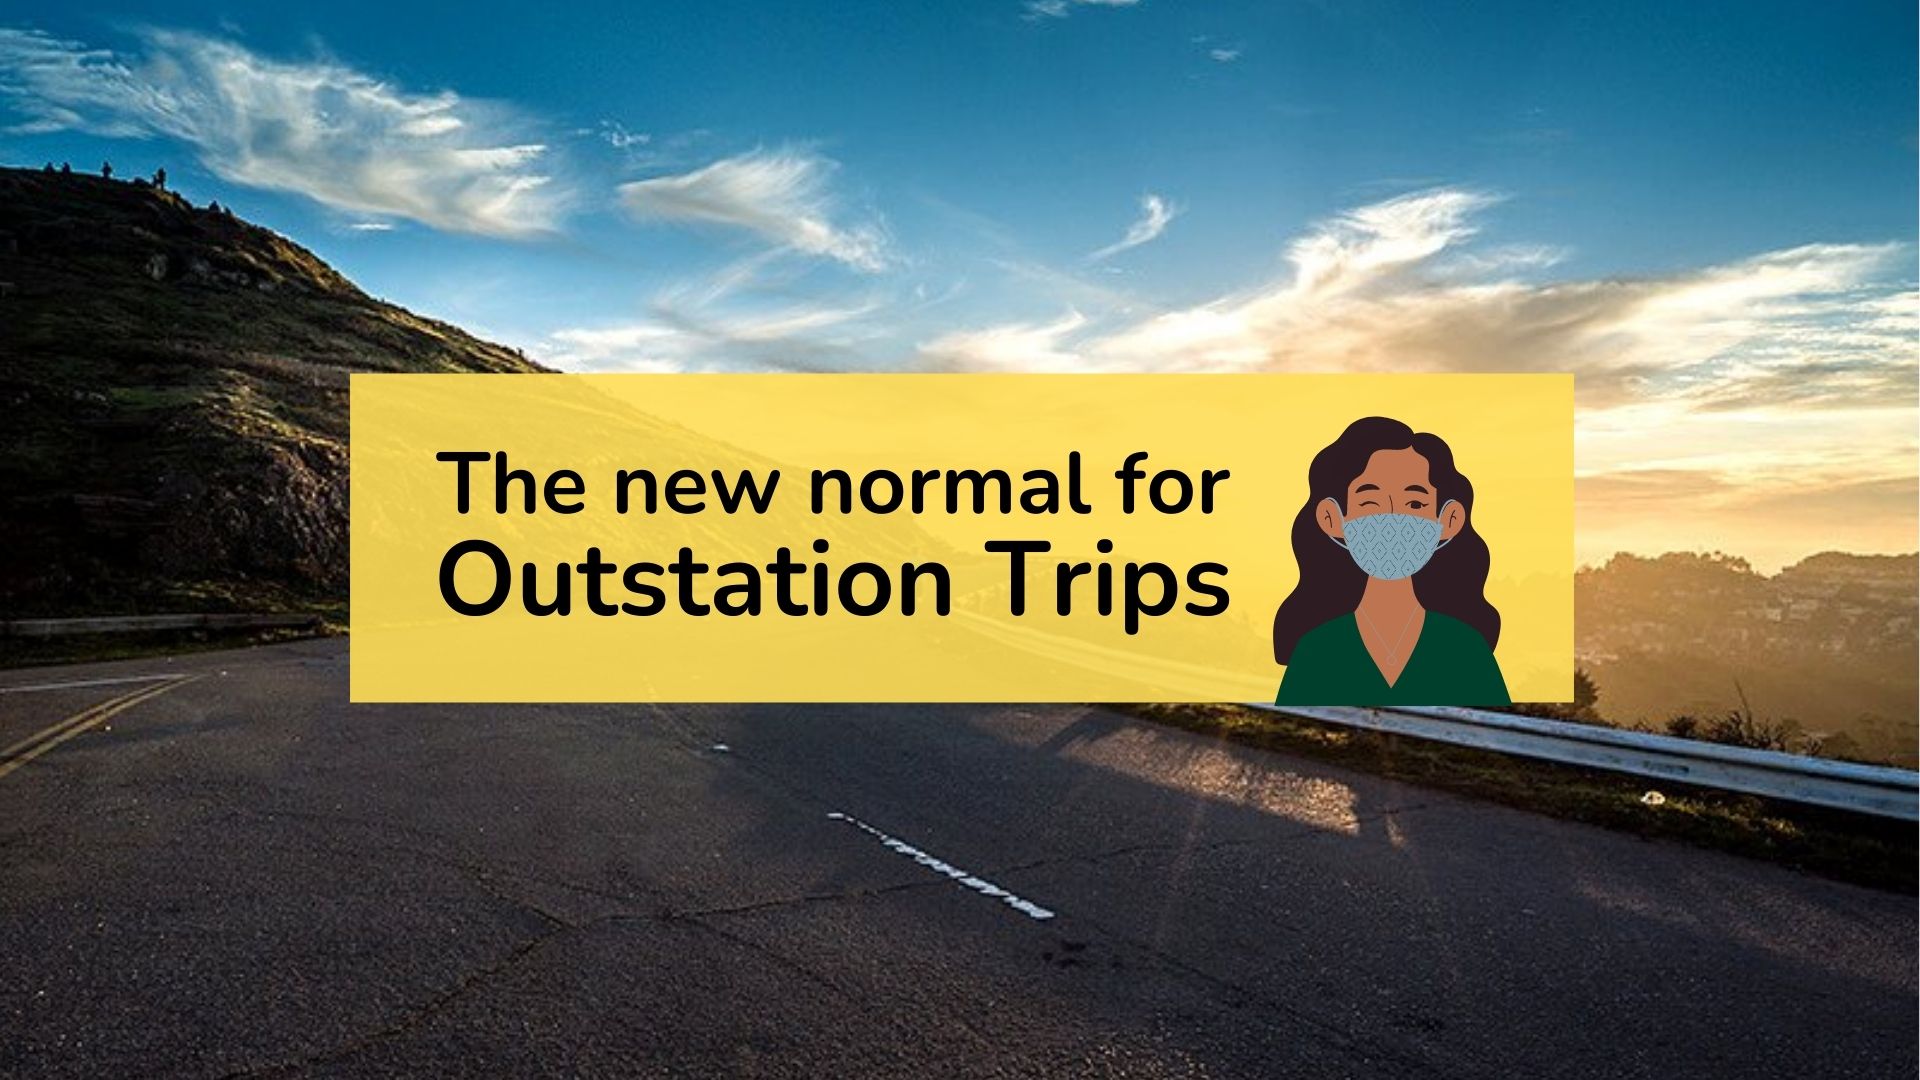 Safety measures for outstation trips during pandemic